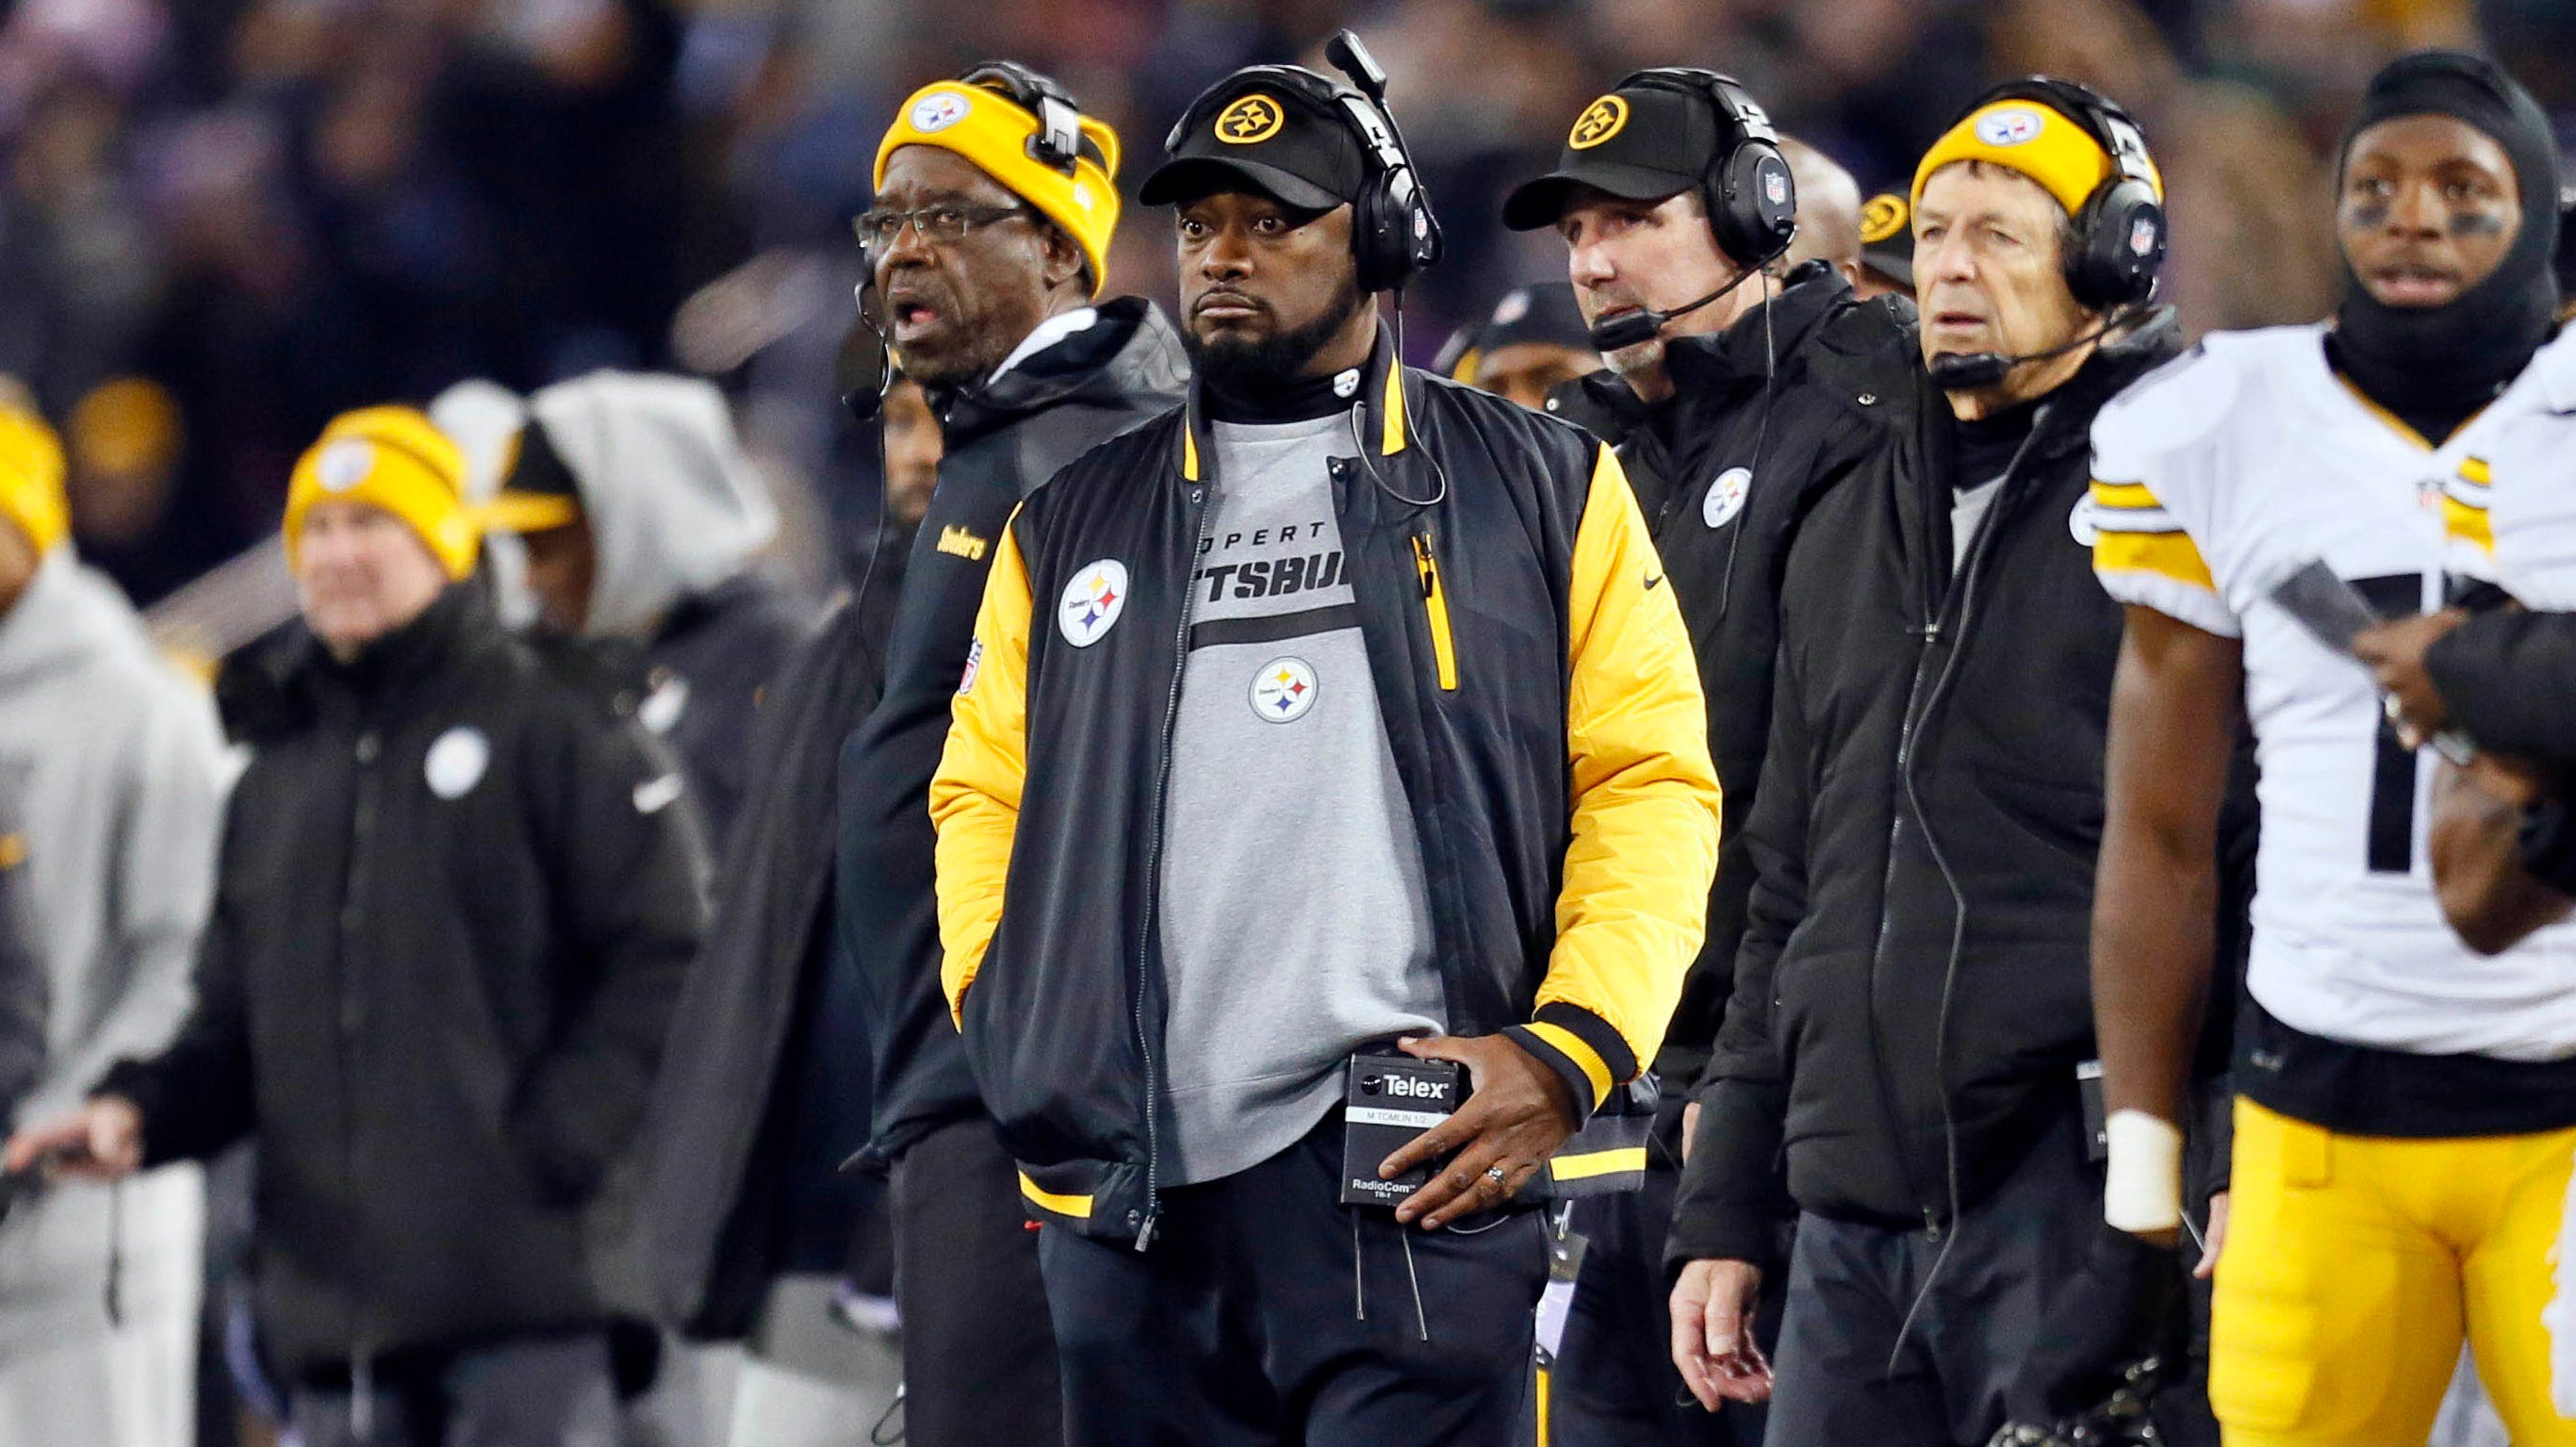 NFL fines Steelers' Mike Tomlin 100,000 for sideline interference